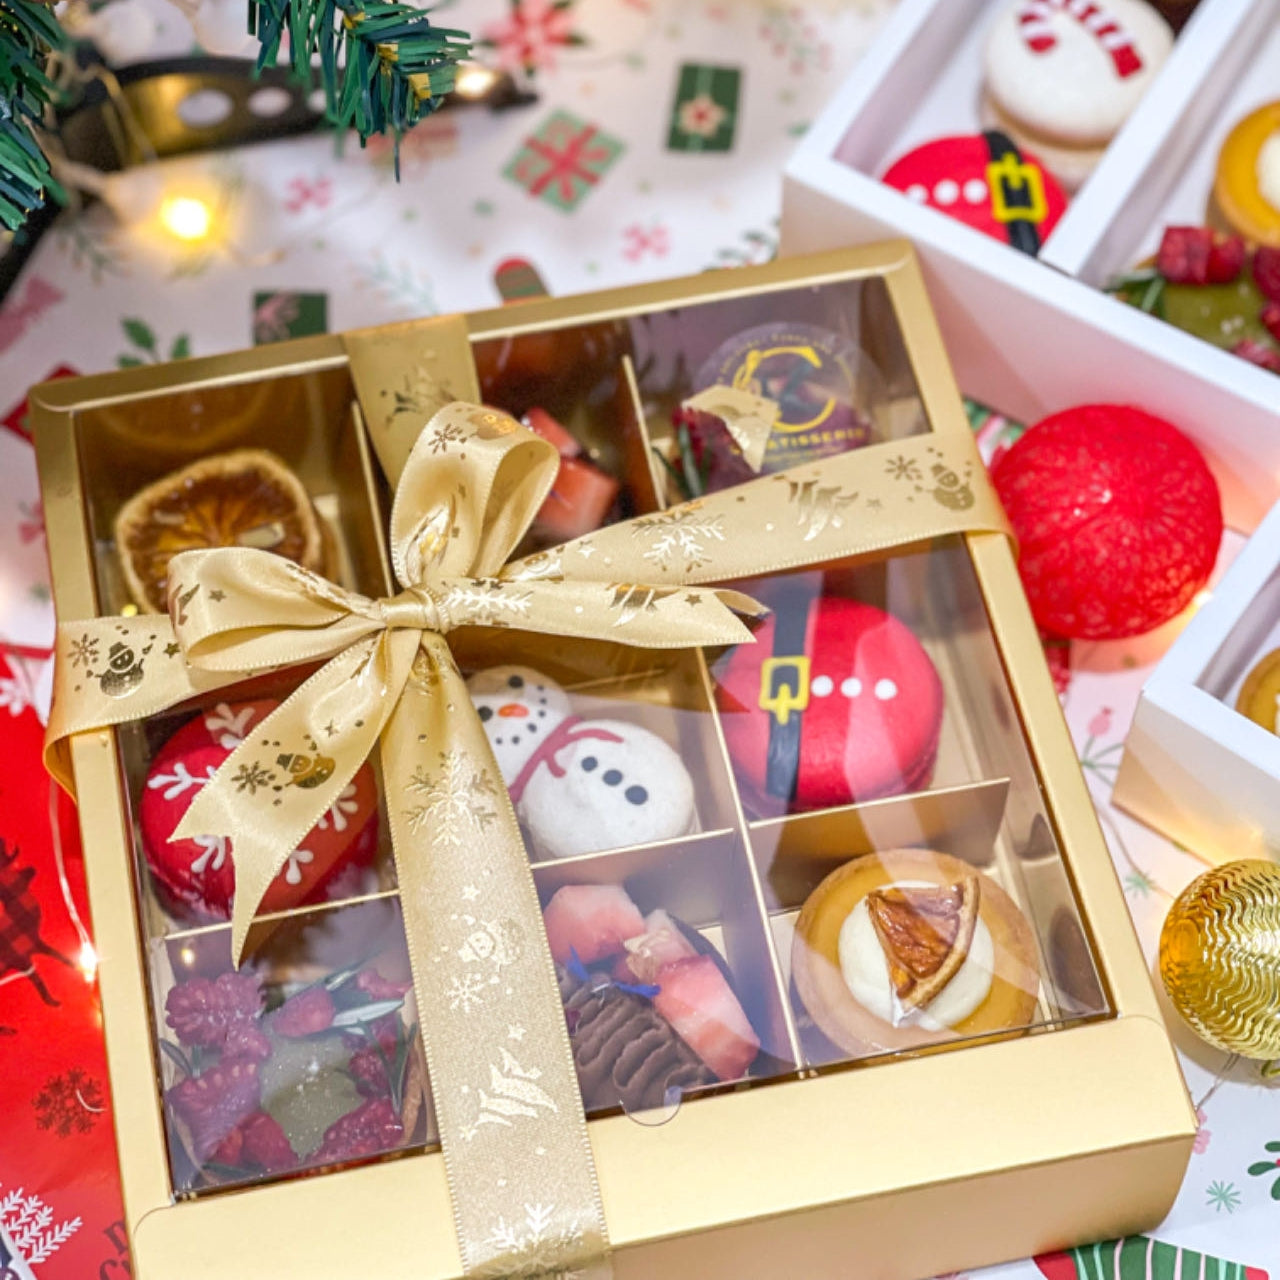 Festival Xmas: Pastry Gift Pack A